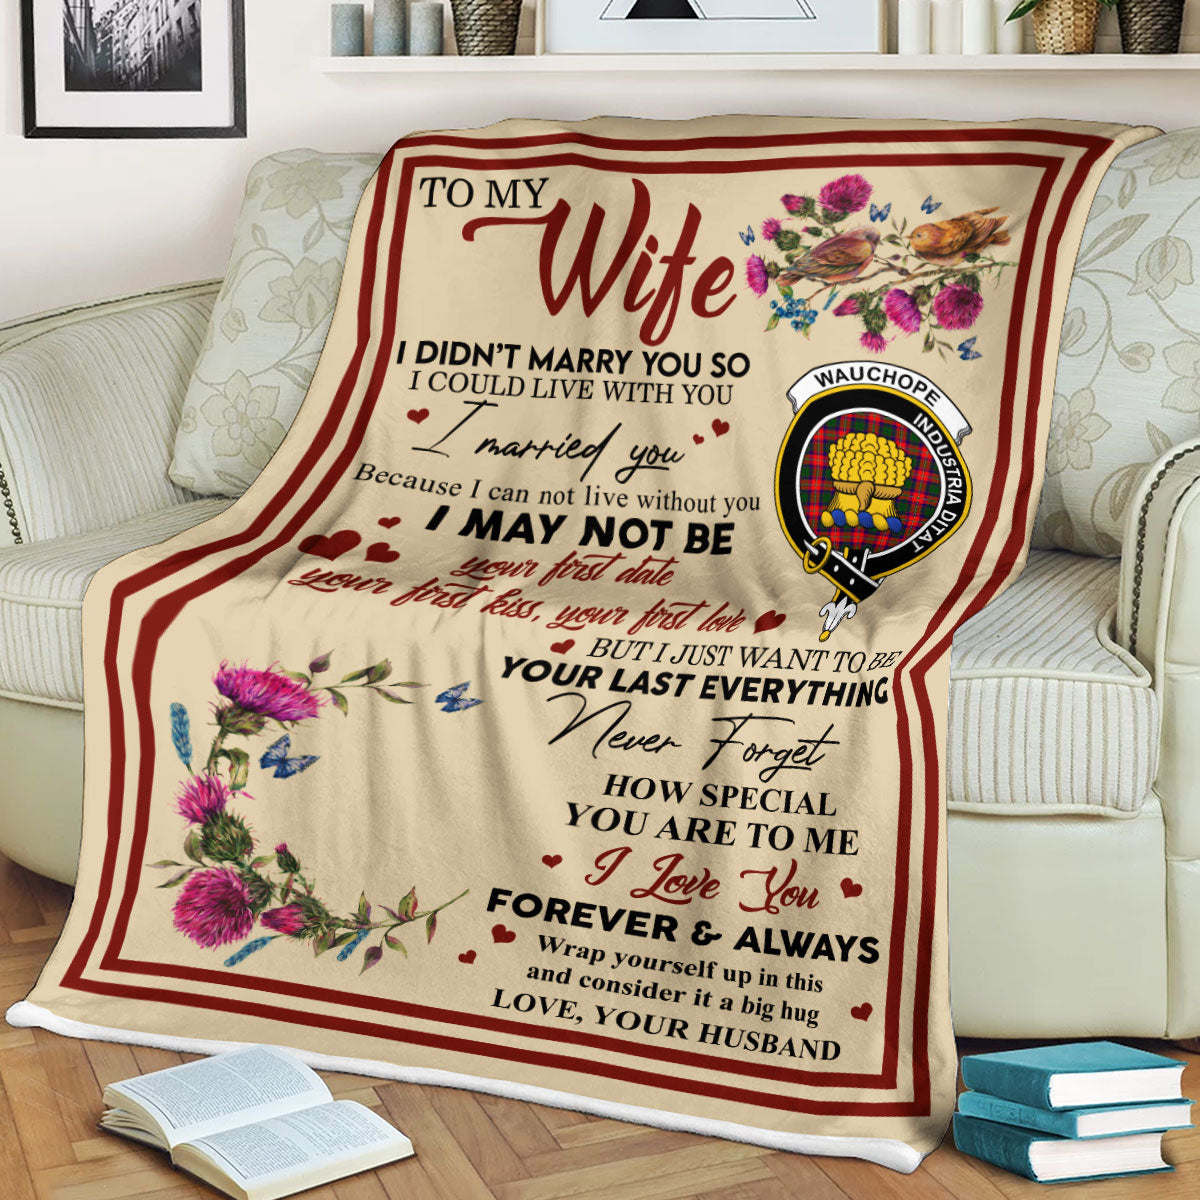 Scots Print Blanket - Wauchope (or Waugh) Tartan Crest Blanket To My Wife Style, Gift From Scottish Husband